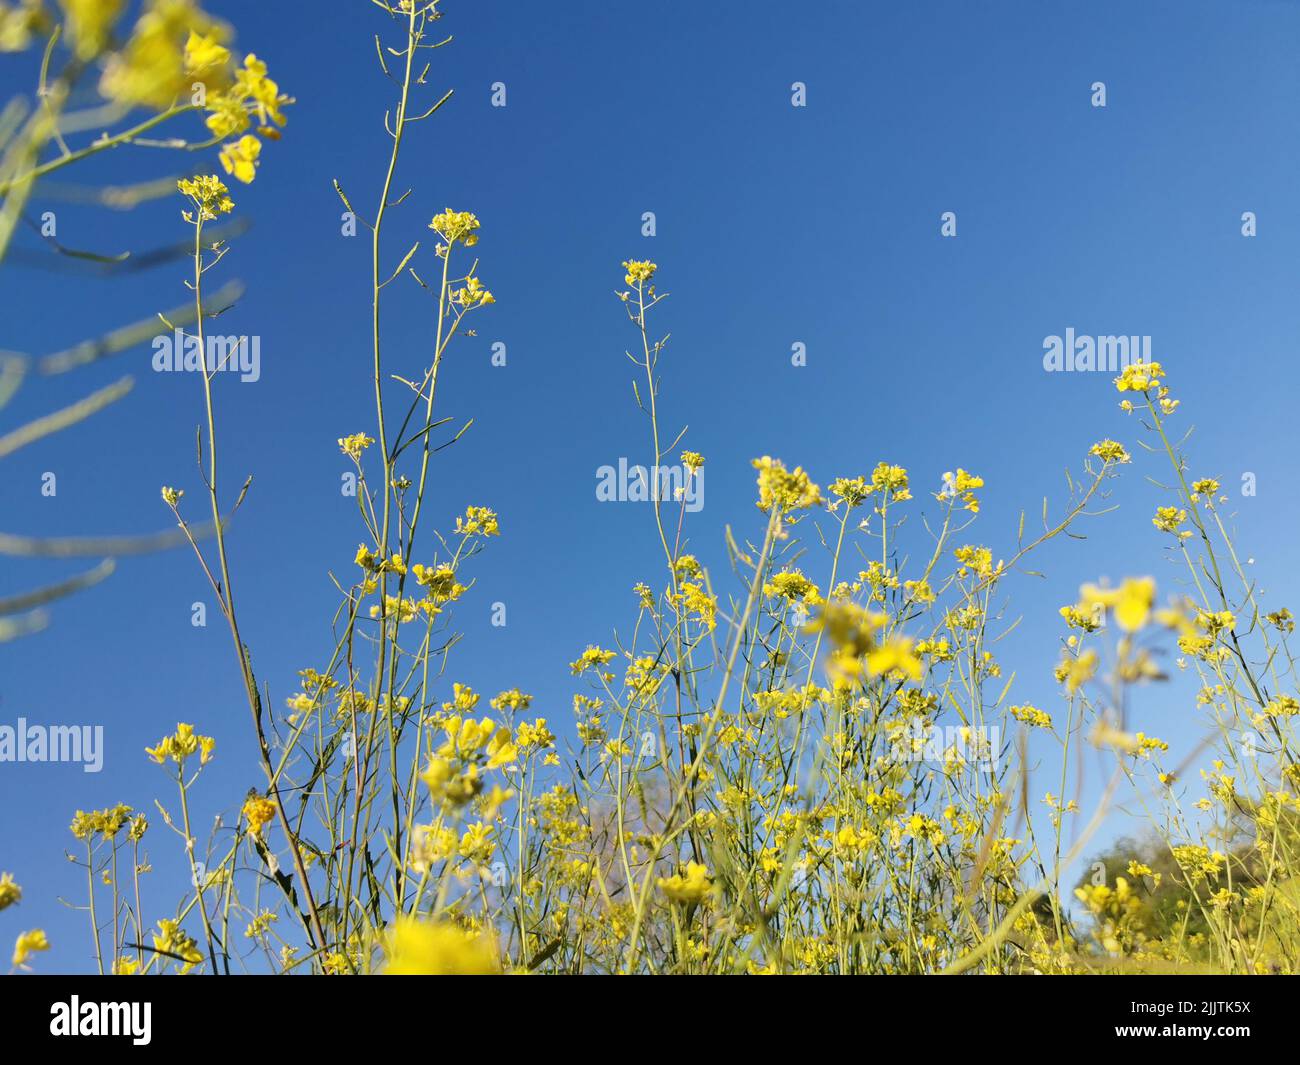 A scenic view of yellow rapeseed flowers in blue sky background on a field Stock Photo